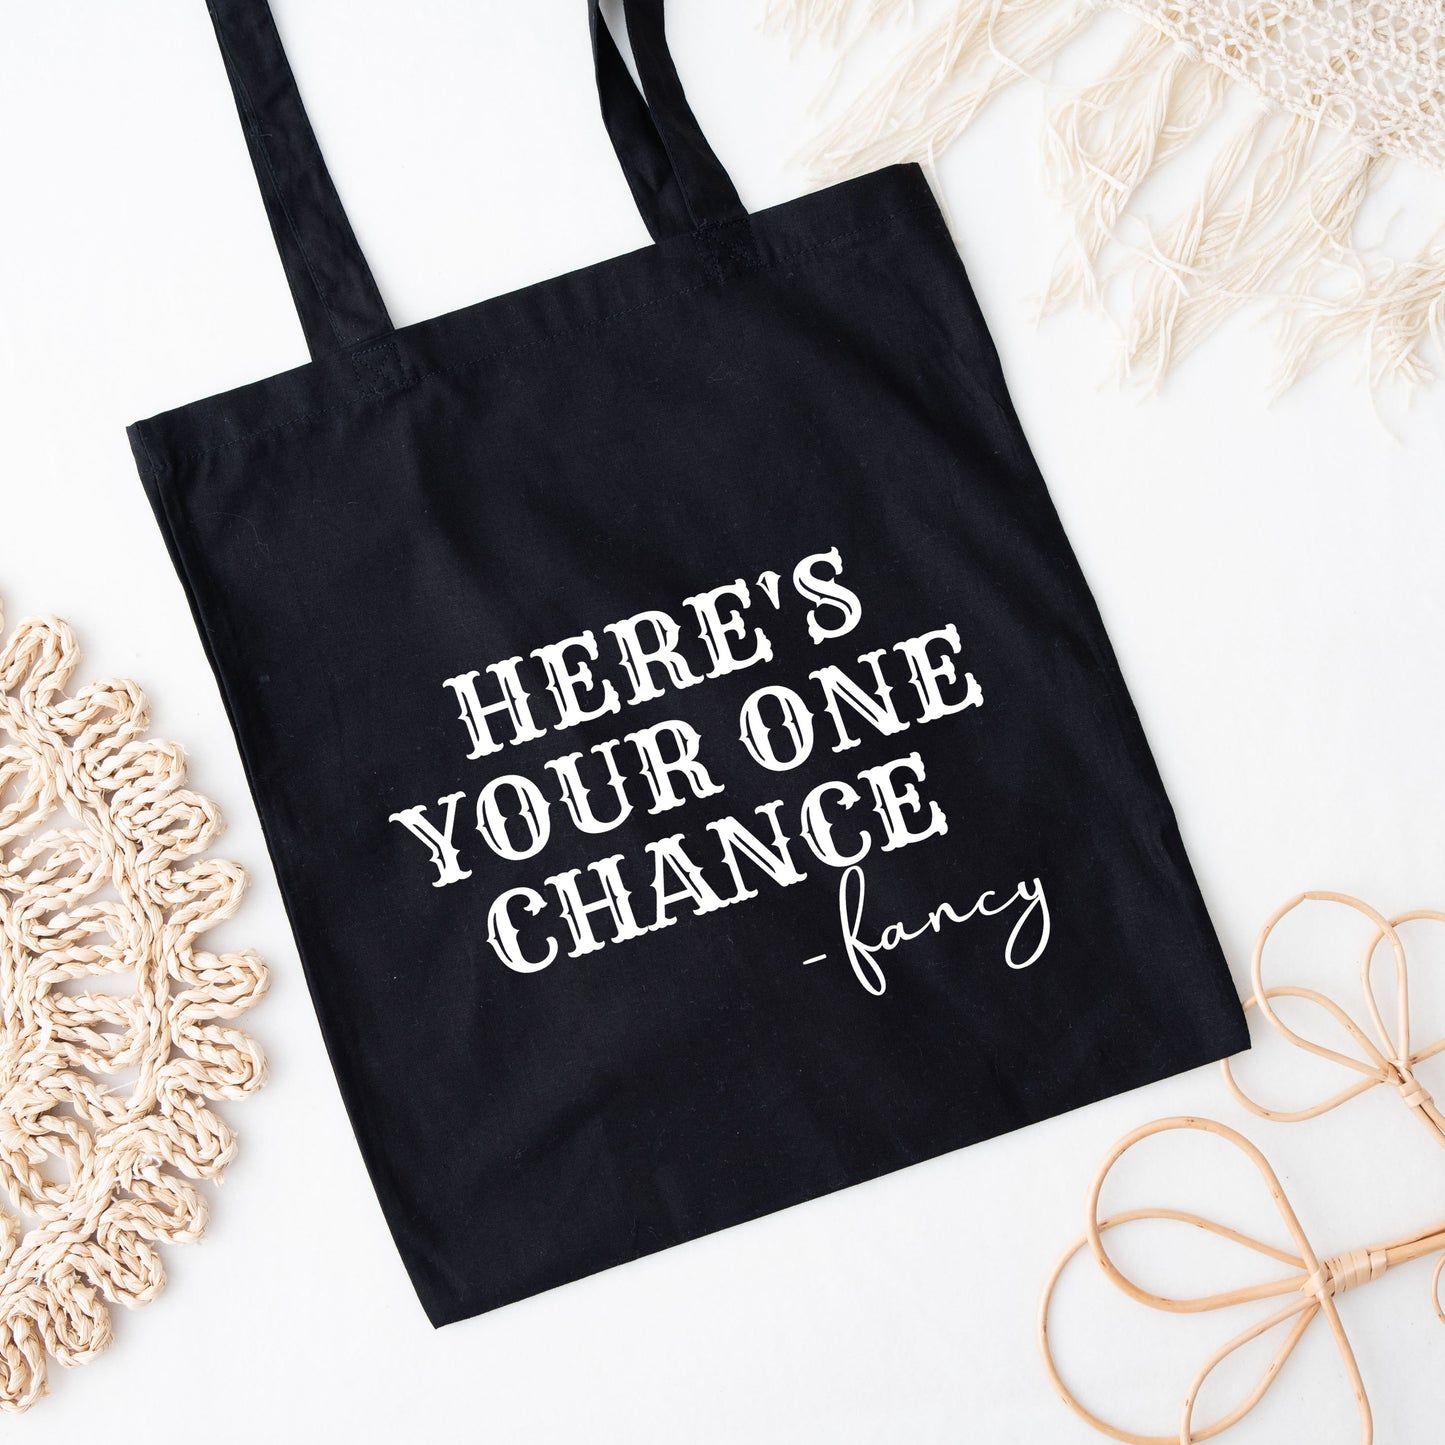 Here's Your One Chance | Tote Bag